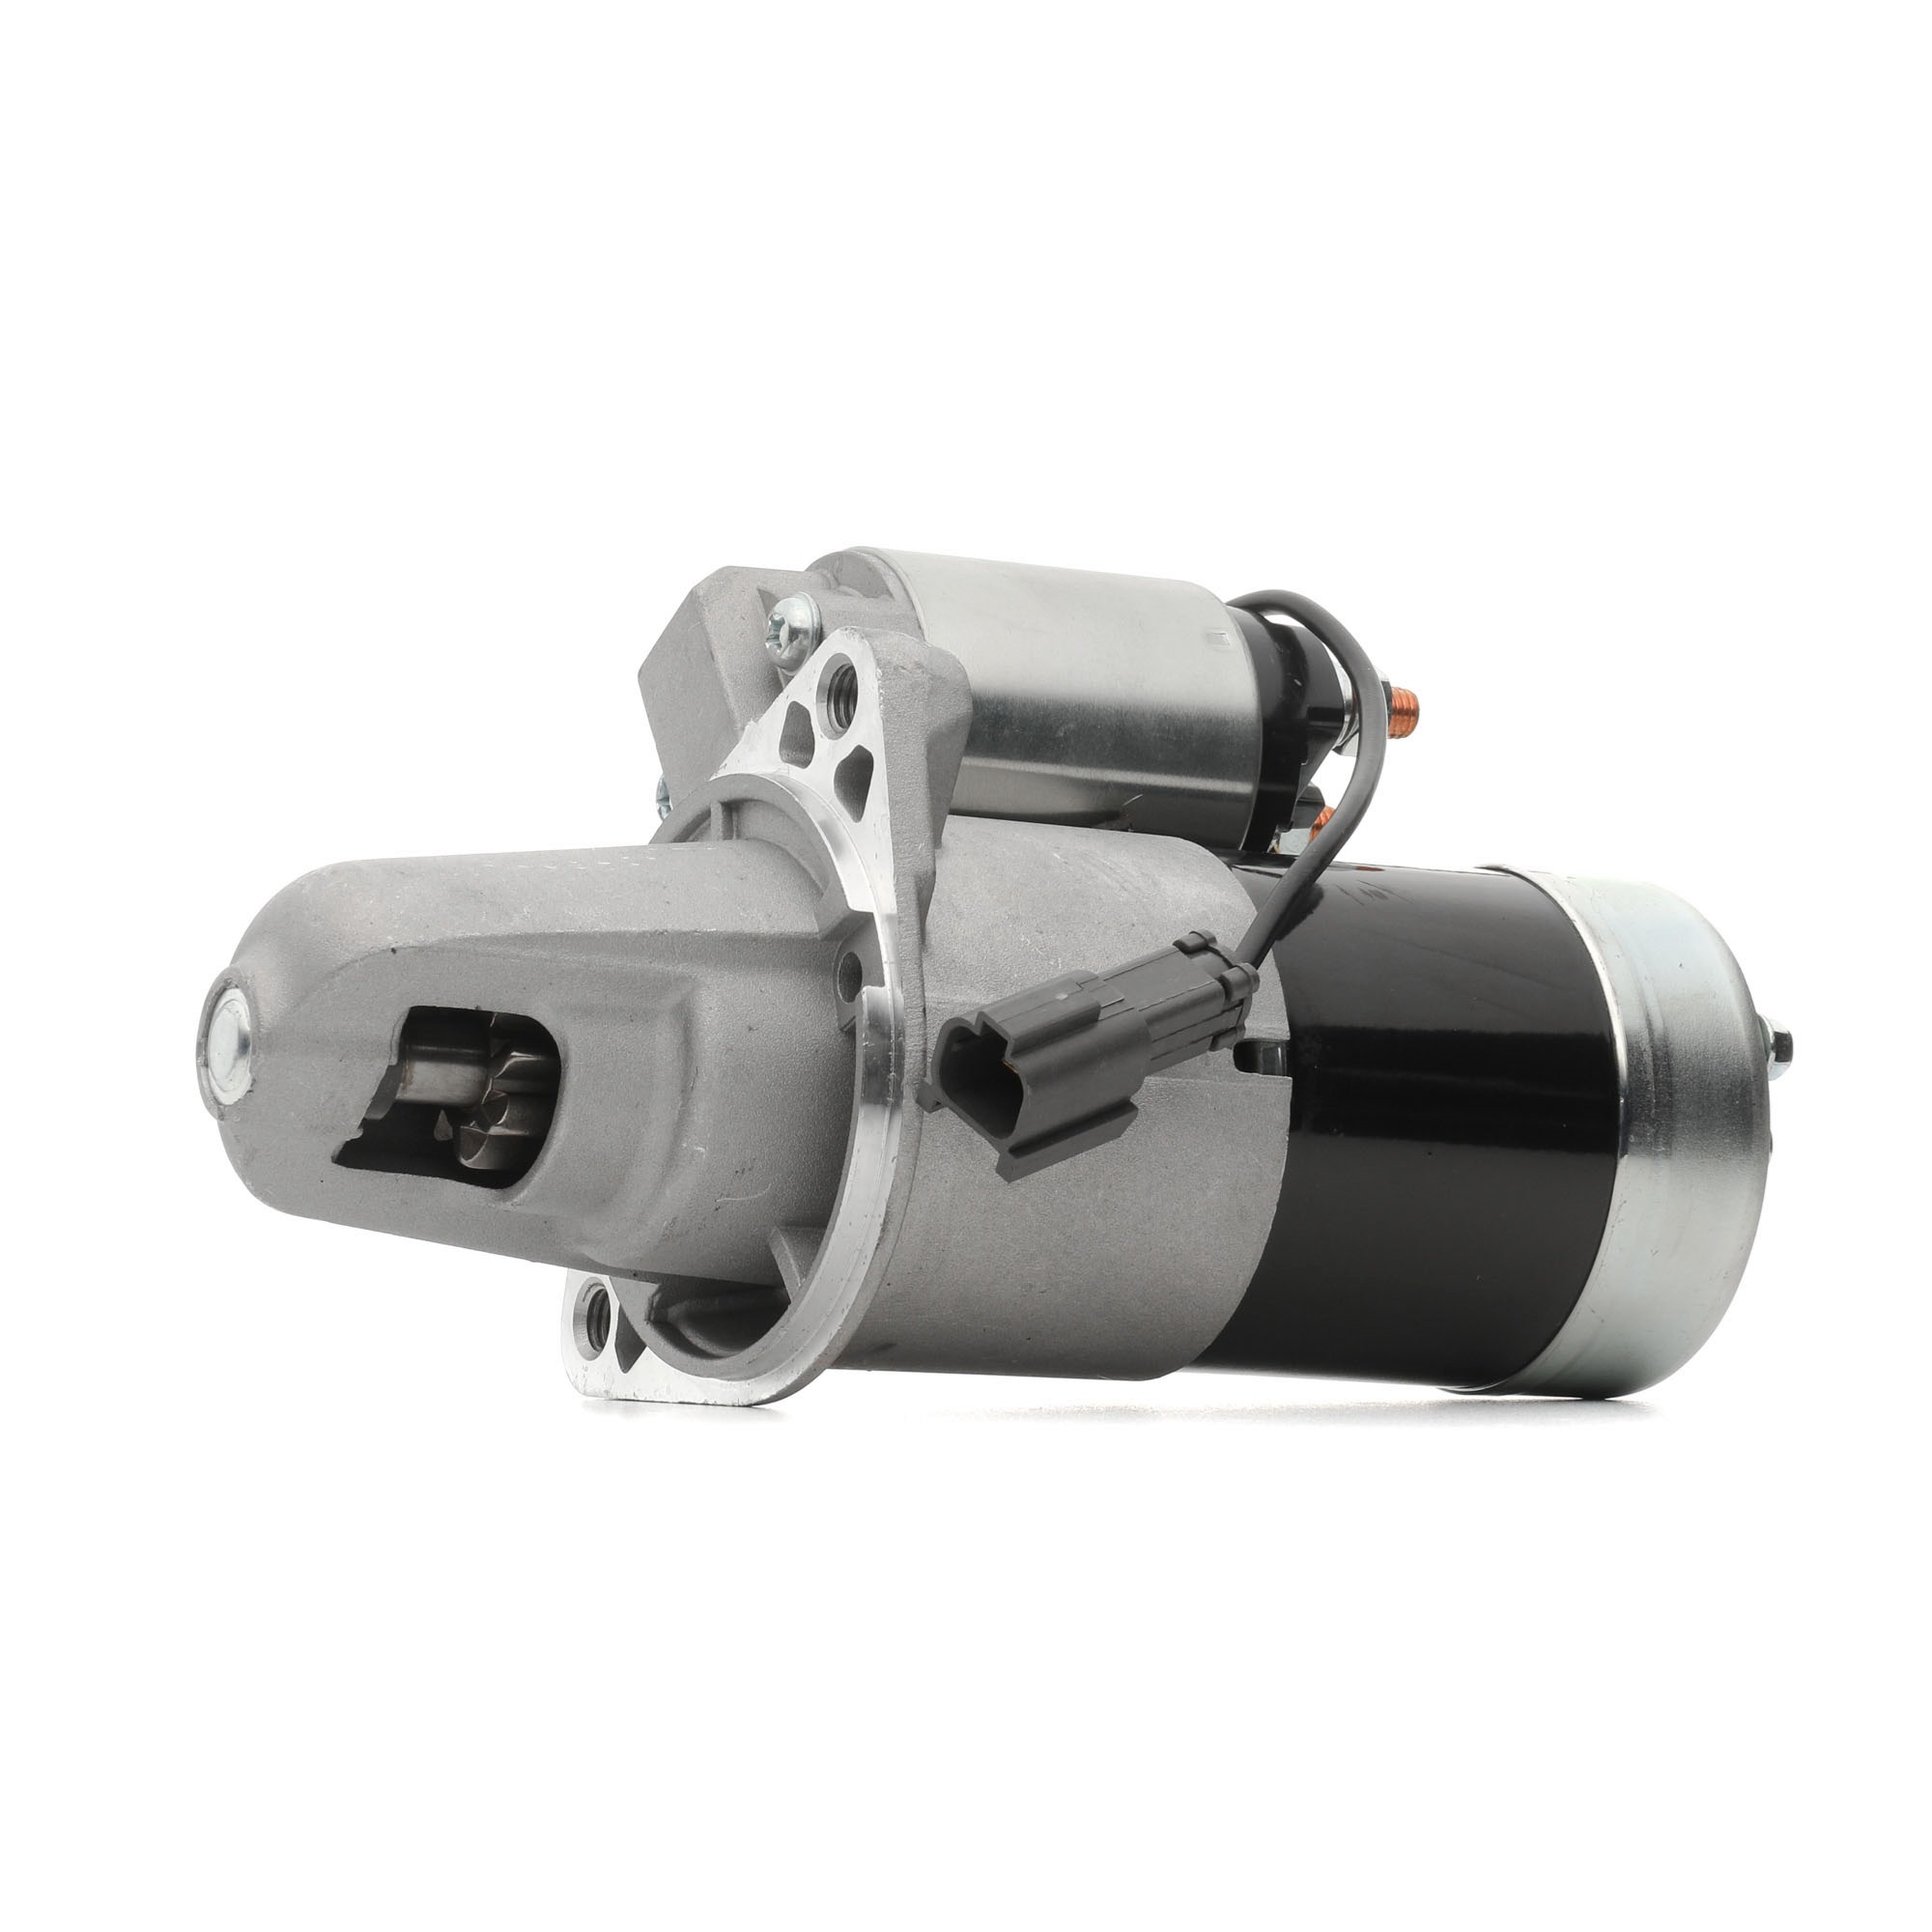 RIDEX 2S0269 Starter motor 12V, 1,4kW, Number of Teeth: 8, with 50(Jet) clamp, Ø 82,5 mm